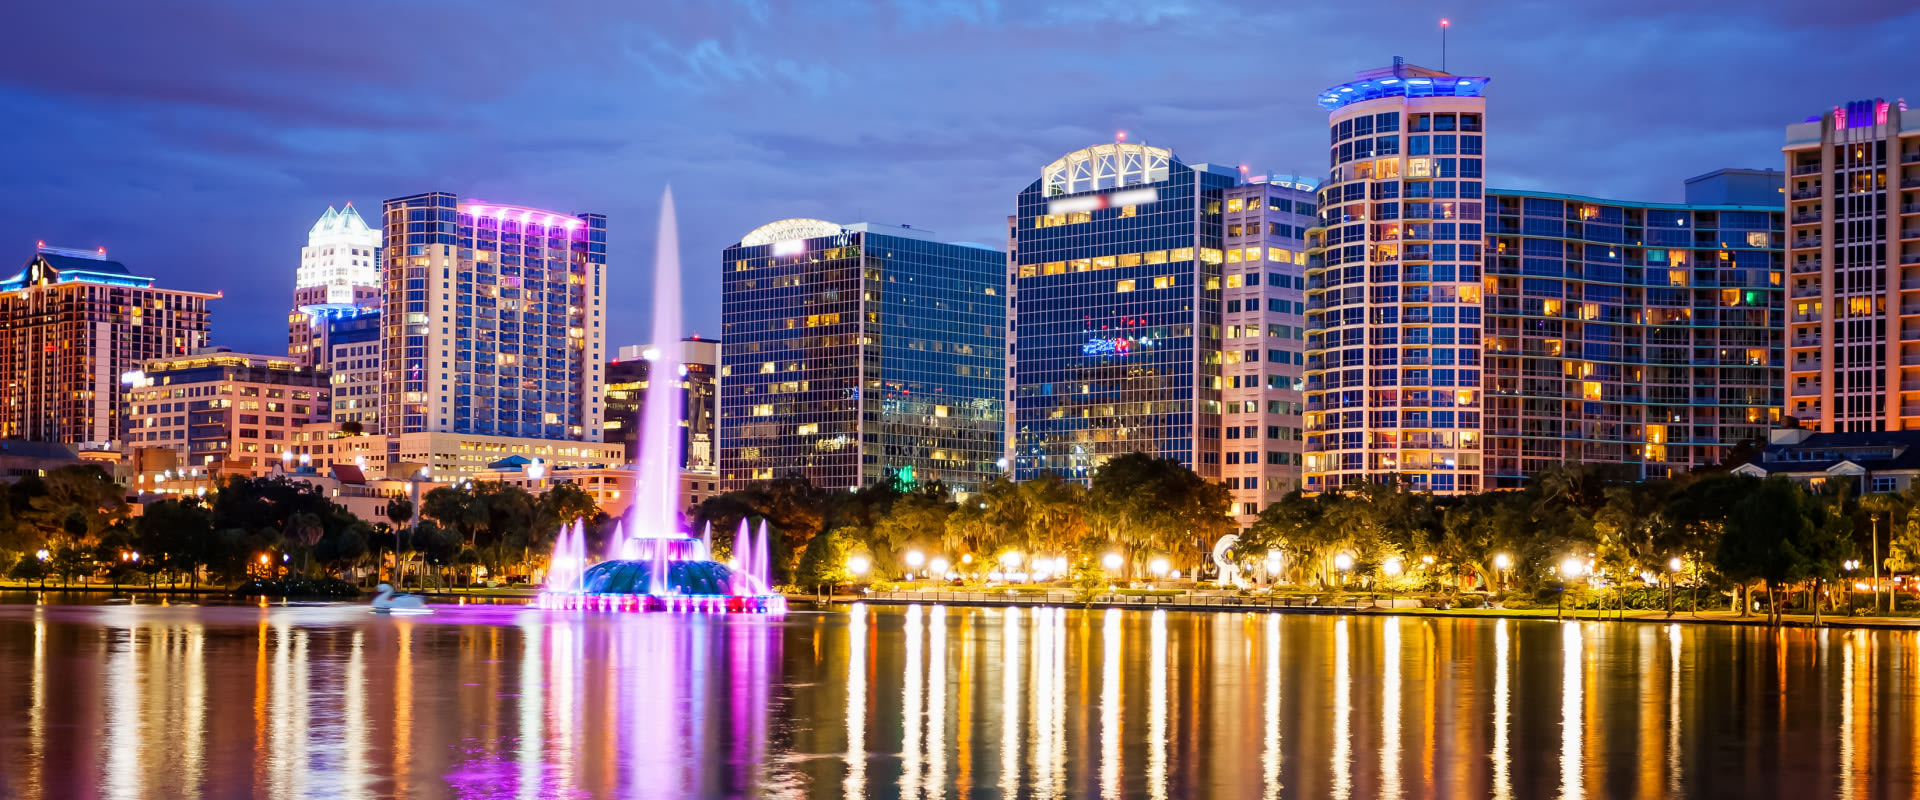 How many cities are in orlando florida?